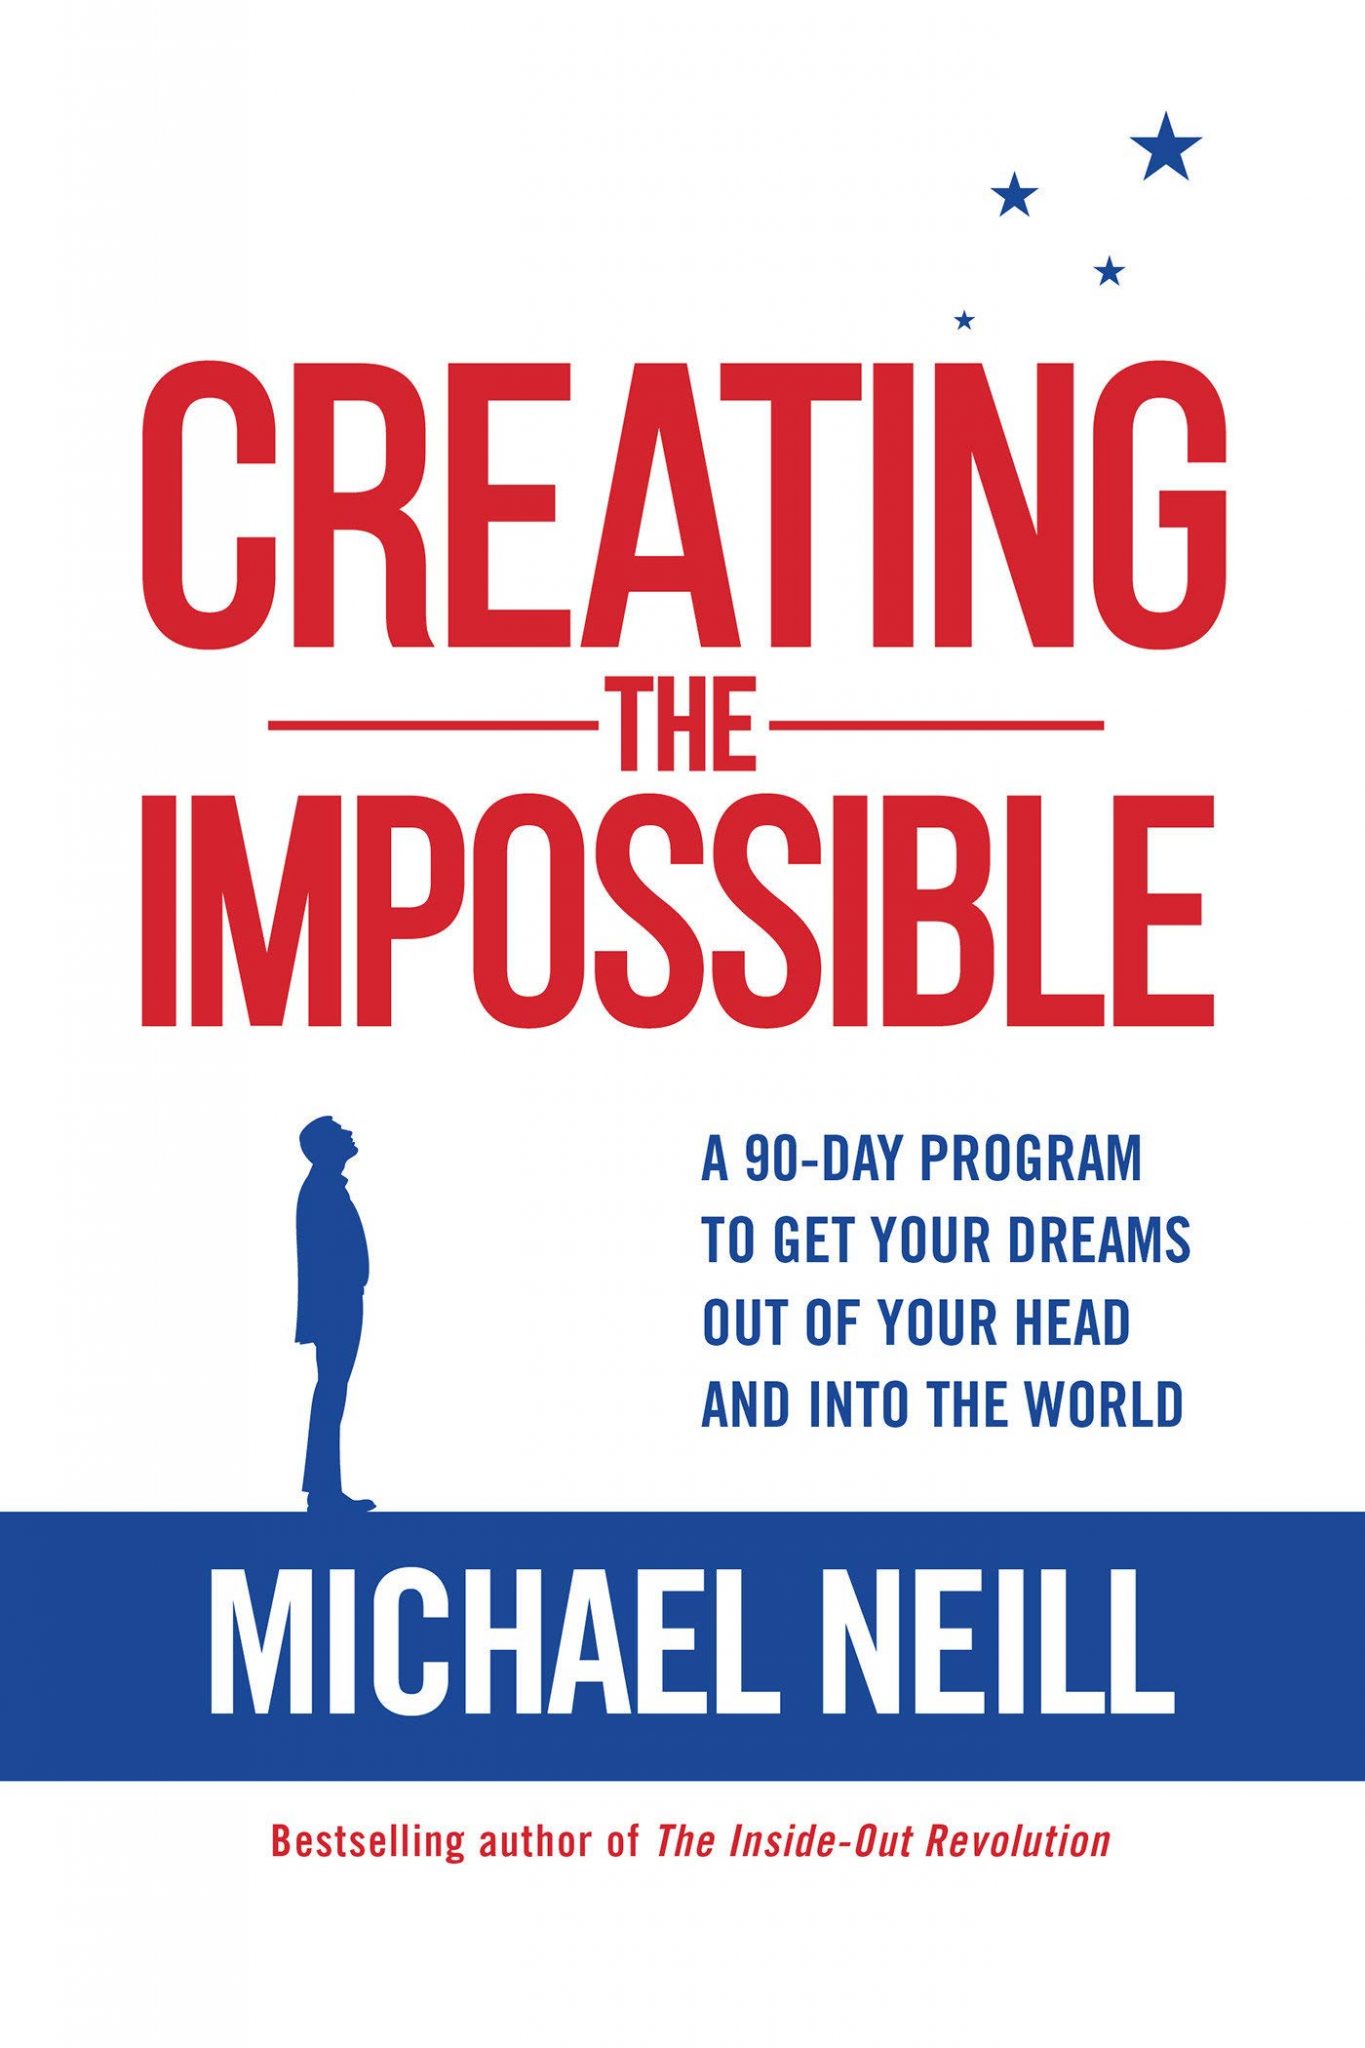 Creating the Impossible, by Michael Neill, turbomind.com BookClub, miguel de la fuente, http://www.turbomind.com